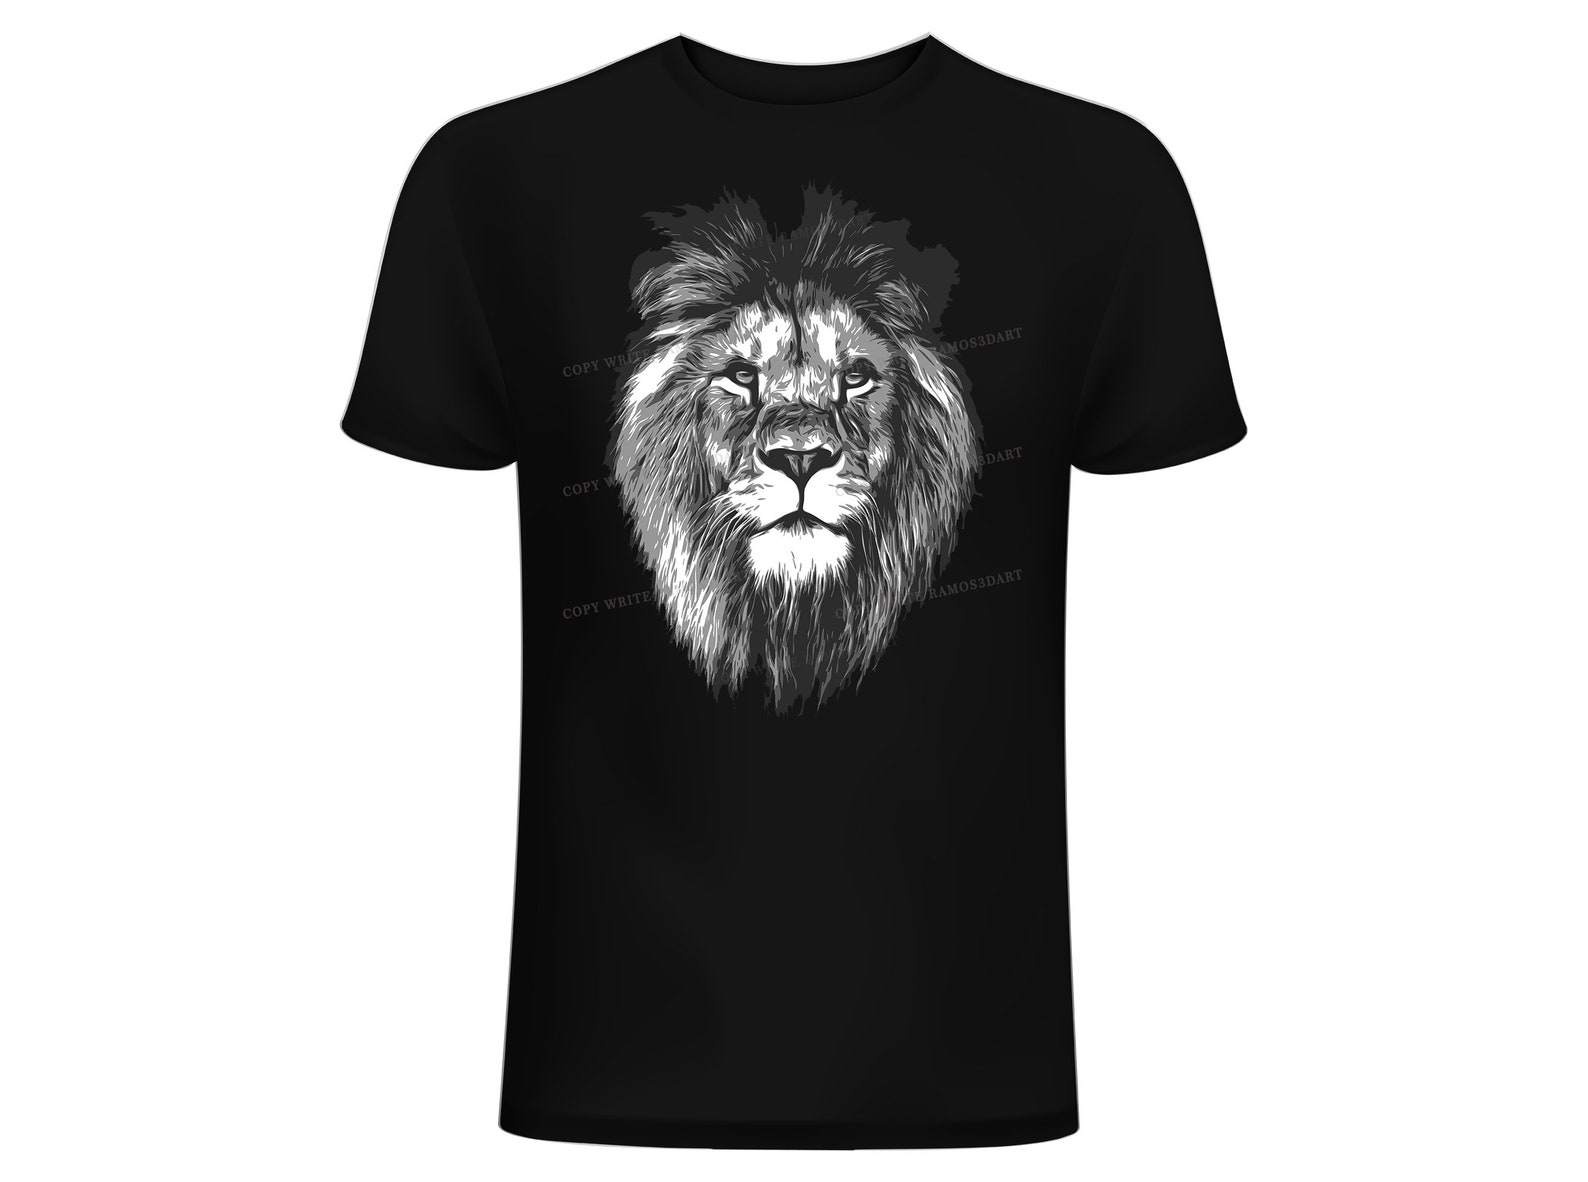 T-shirt collection with lions.